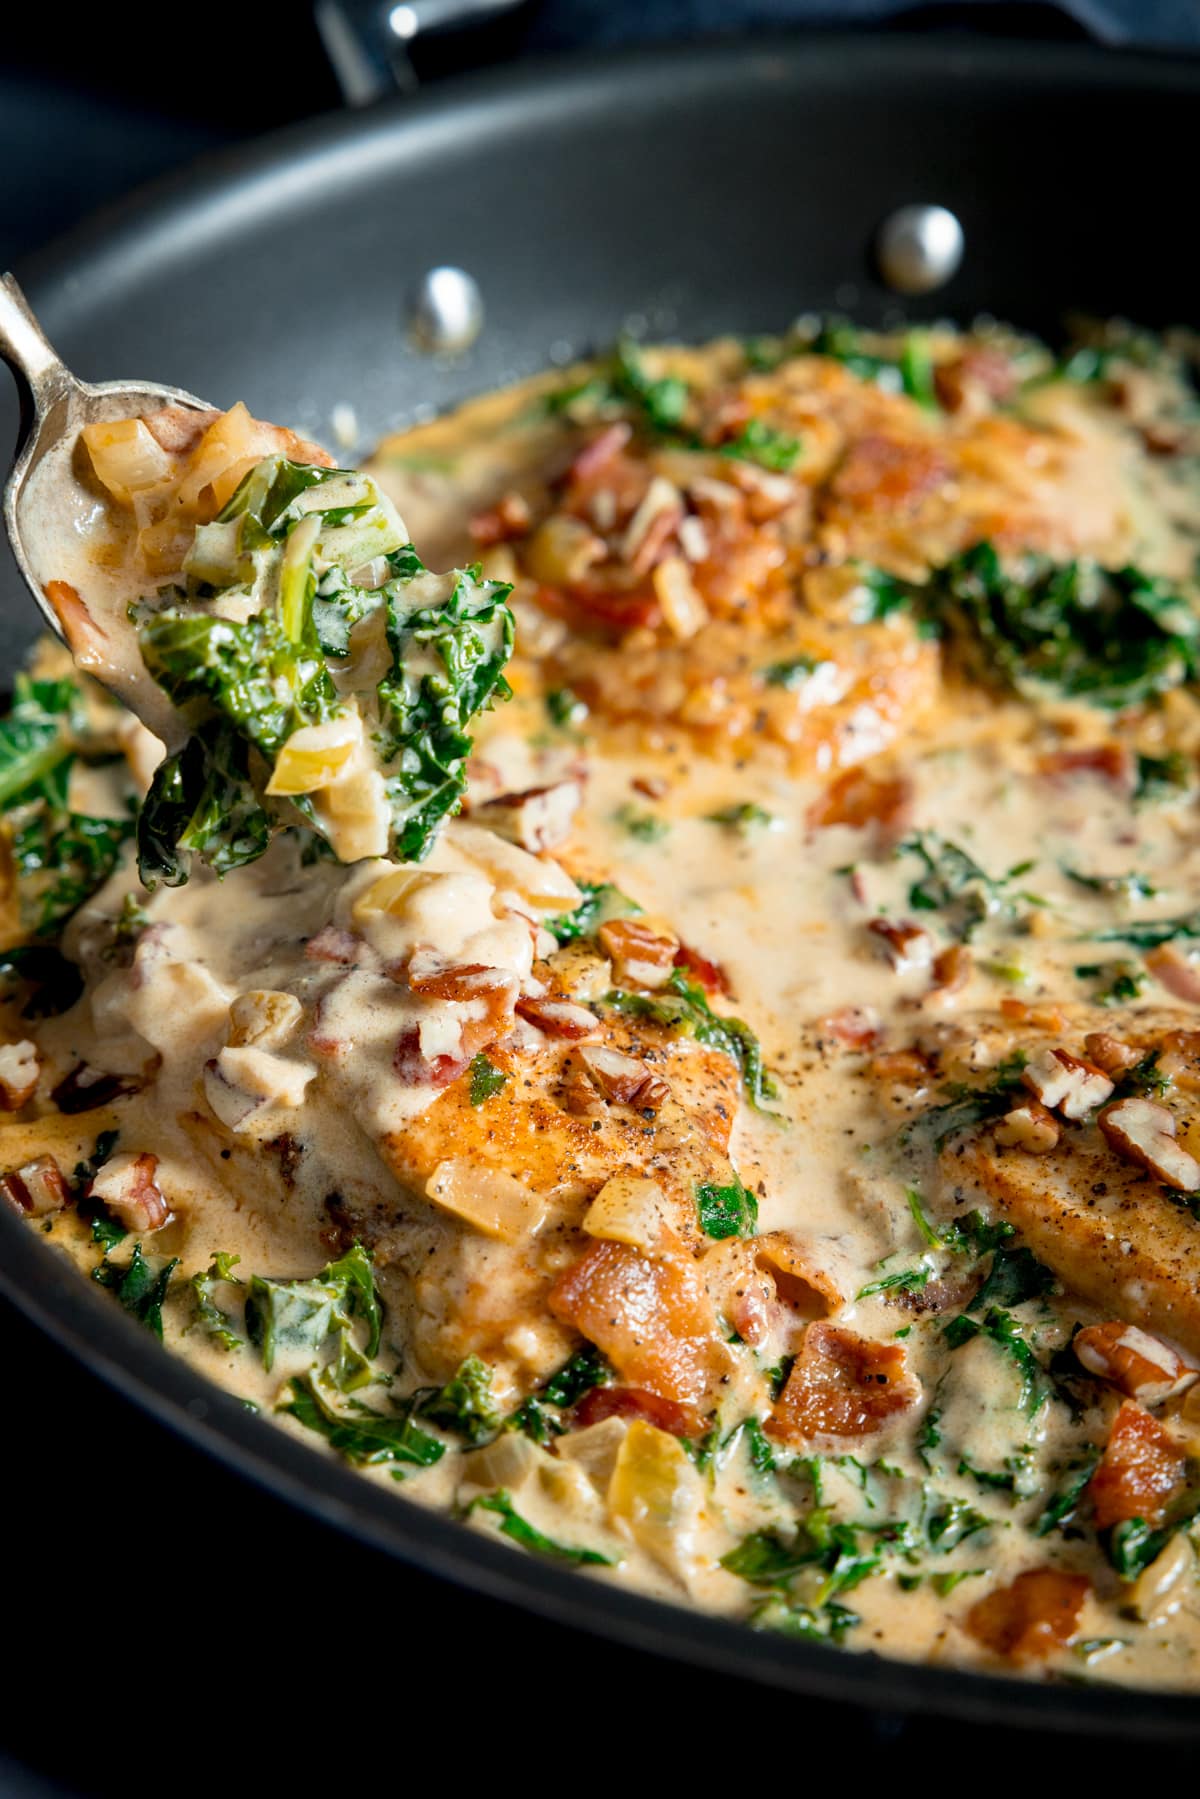 Close up picture of cream dijon sauce with kale and bacon being spooned over a cooked chicken breast in a frying pan.